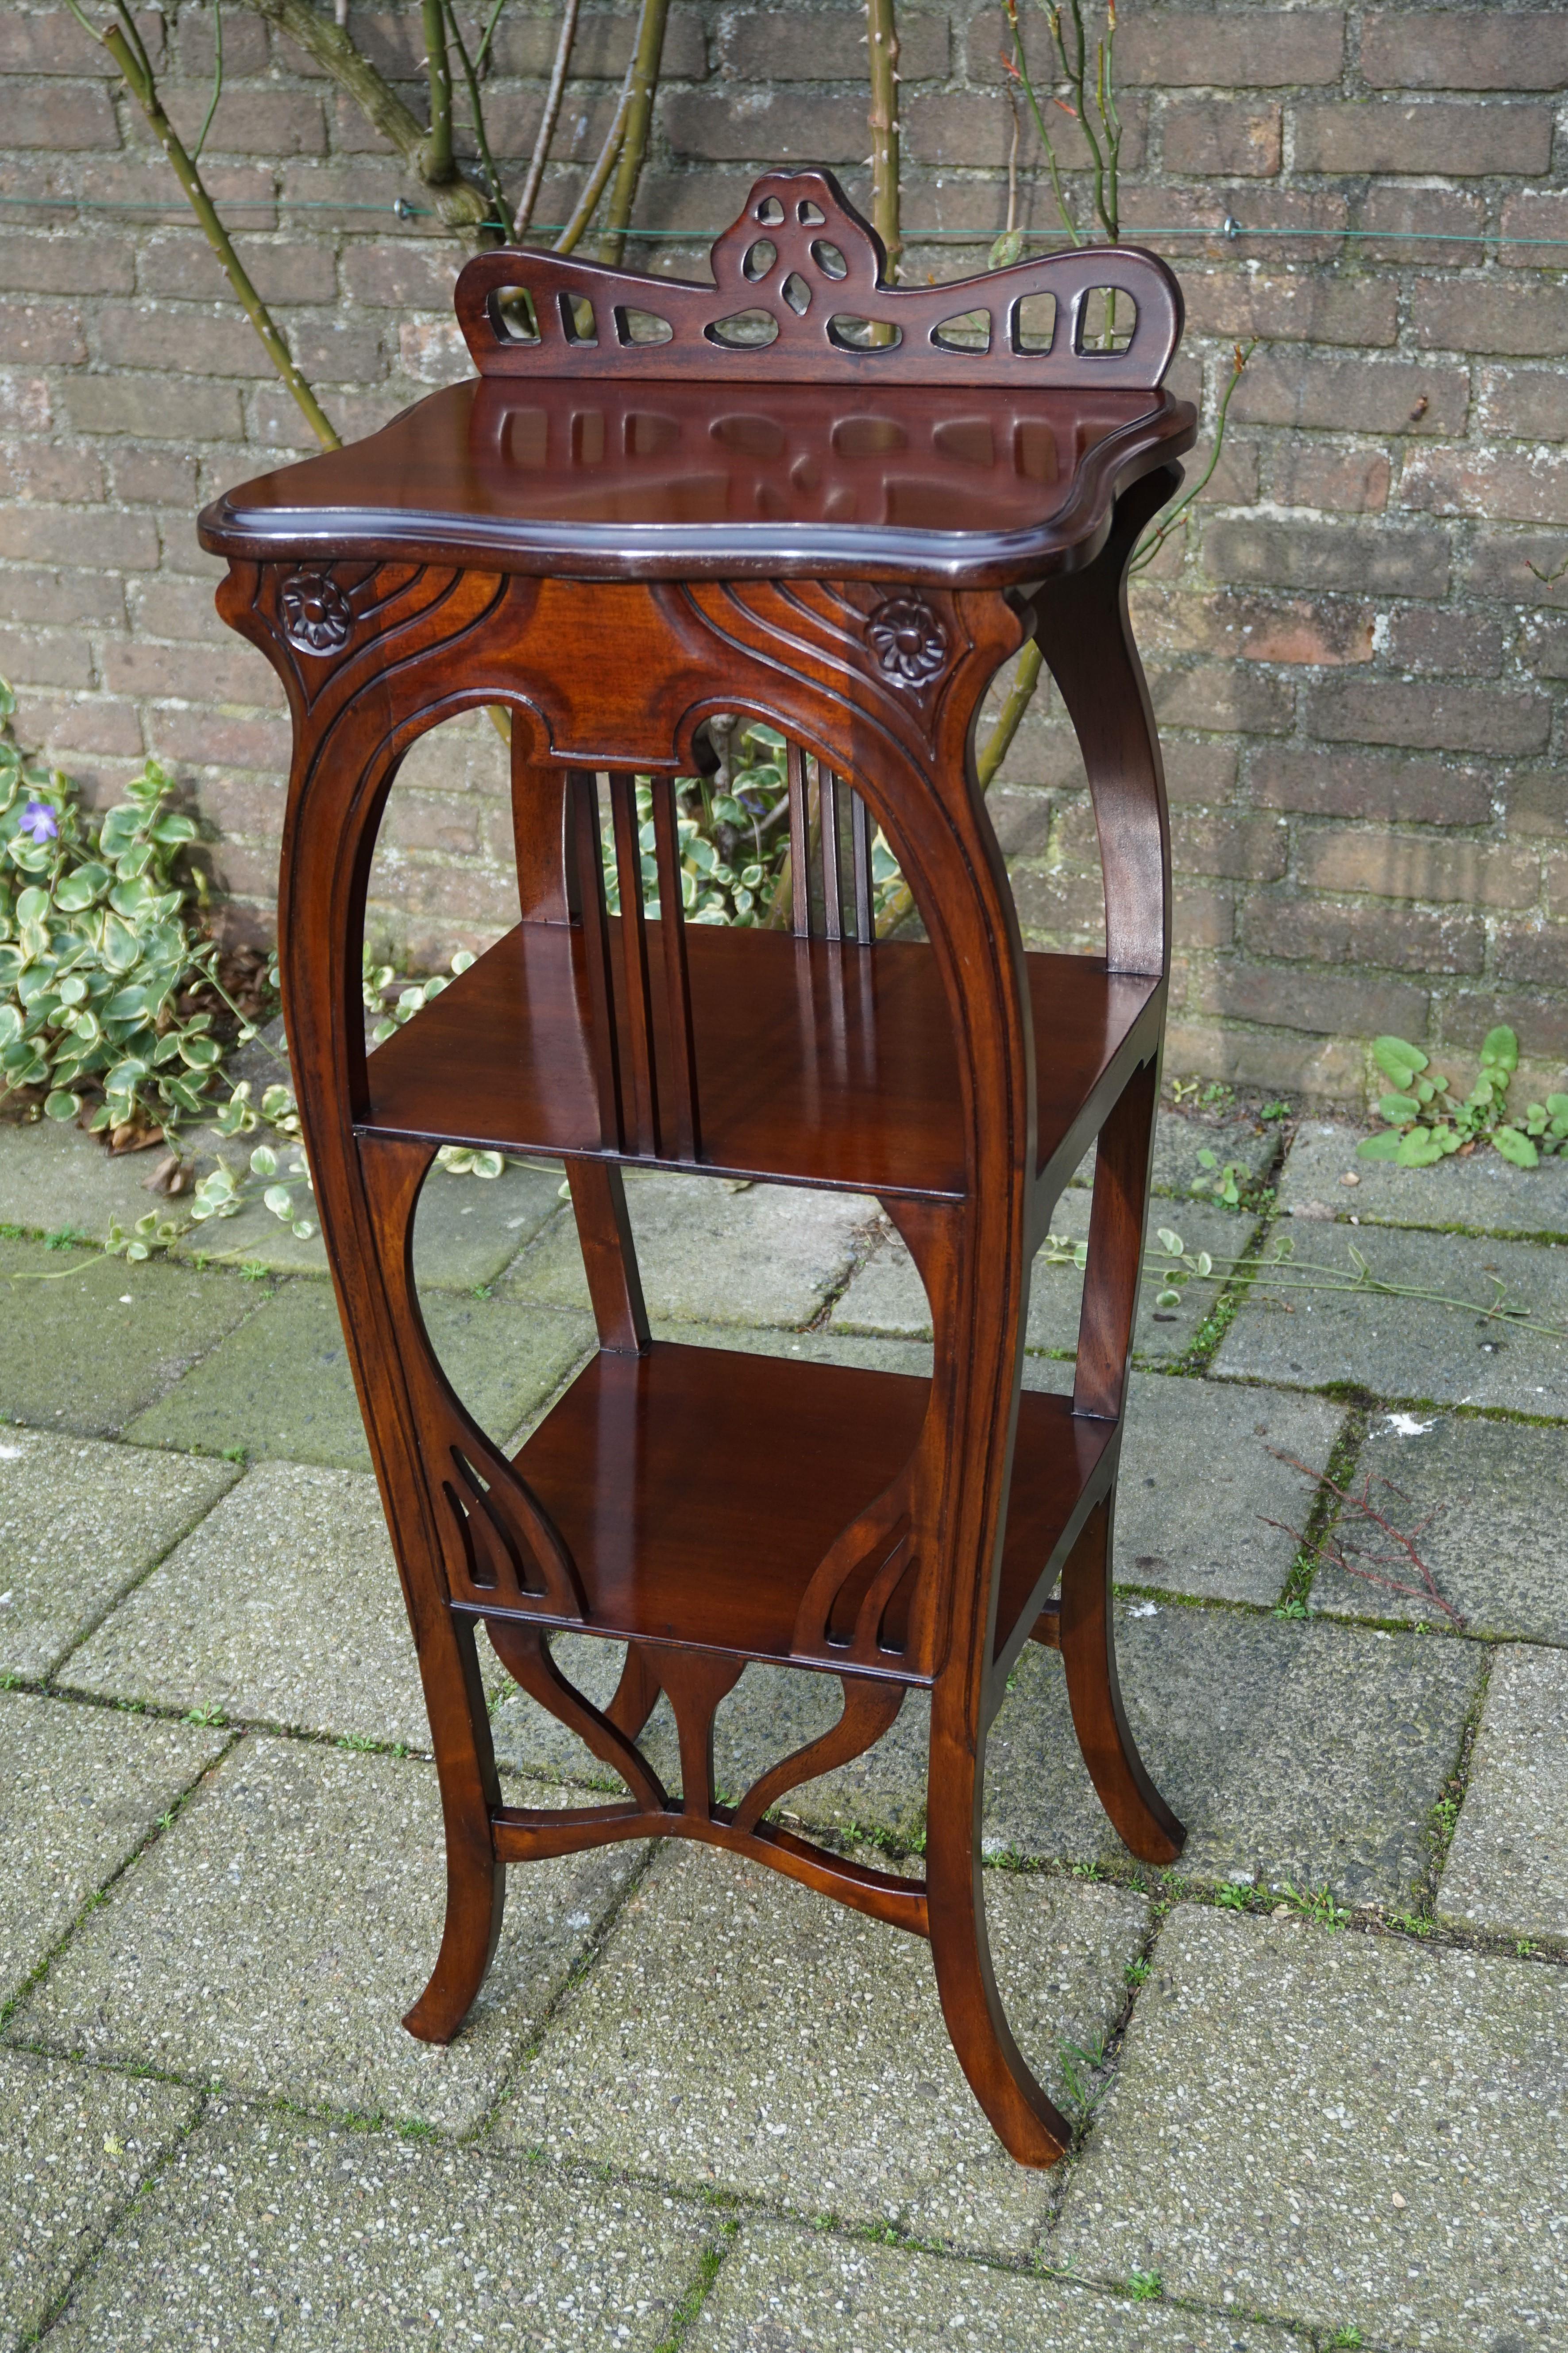 20th Century Art Nouveau Style Etagere Stand / Side Table in the Manner of Louis Majorelle